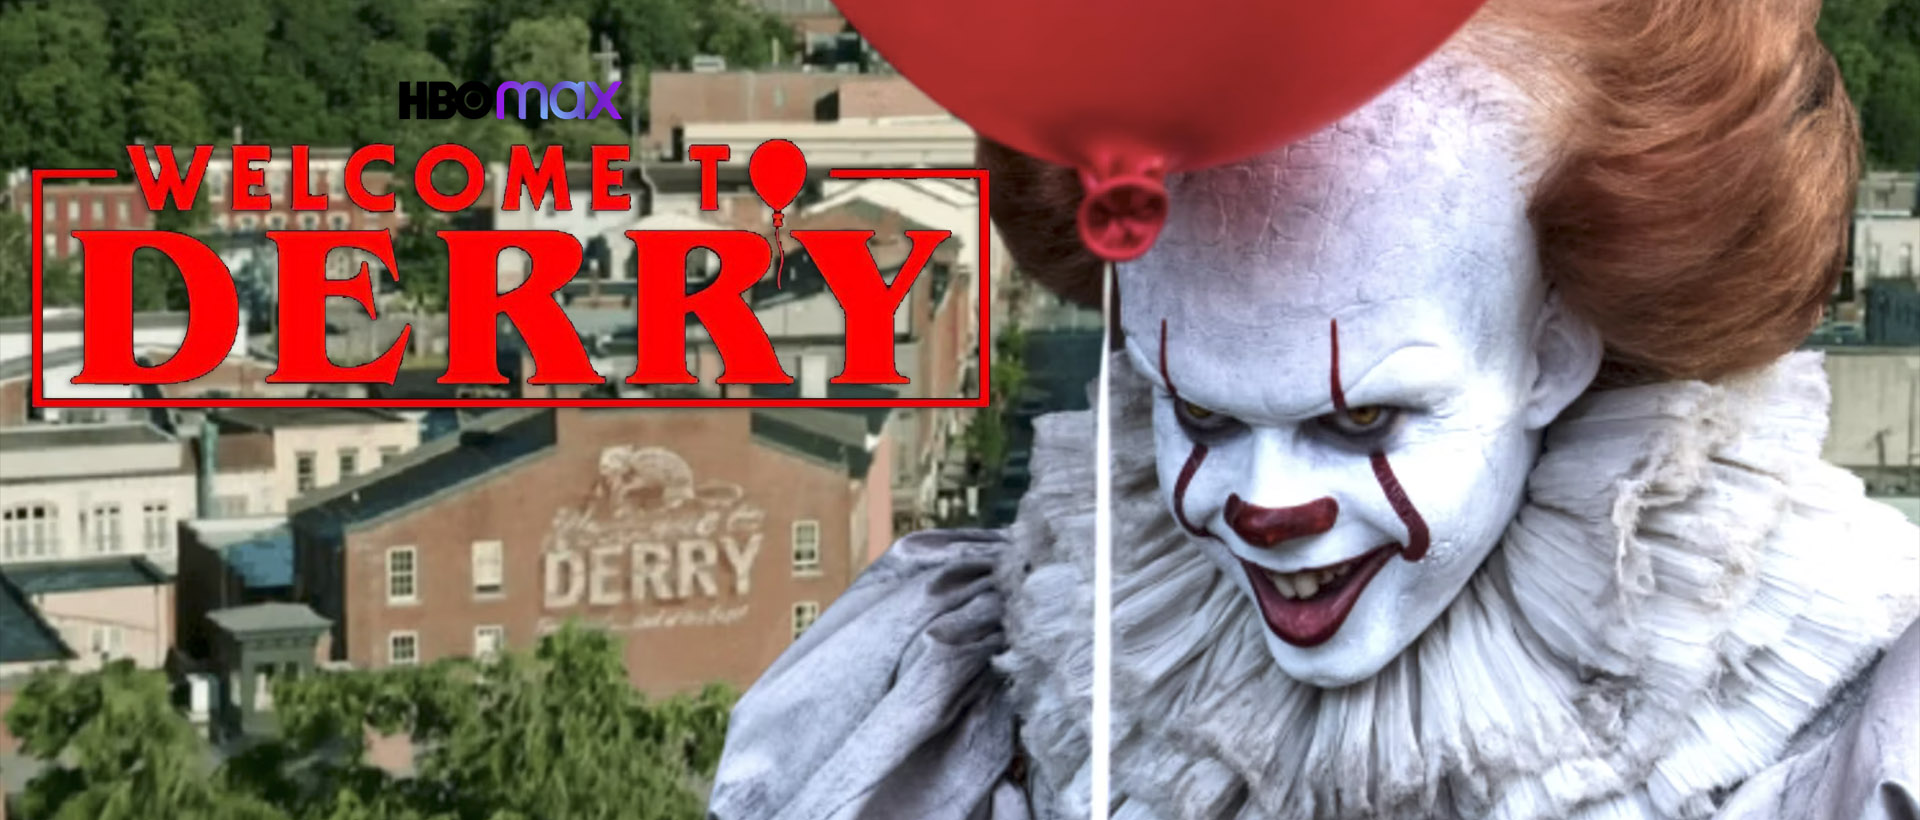 welcome to derry pennywise hbo max banner